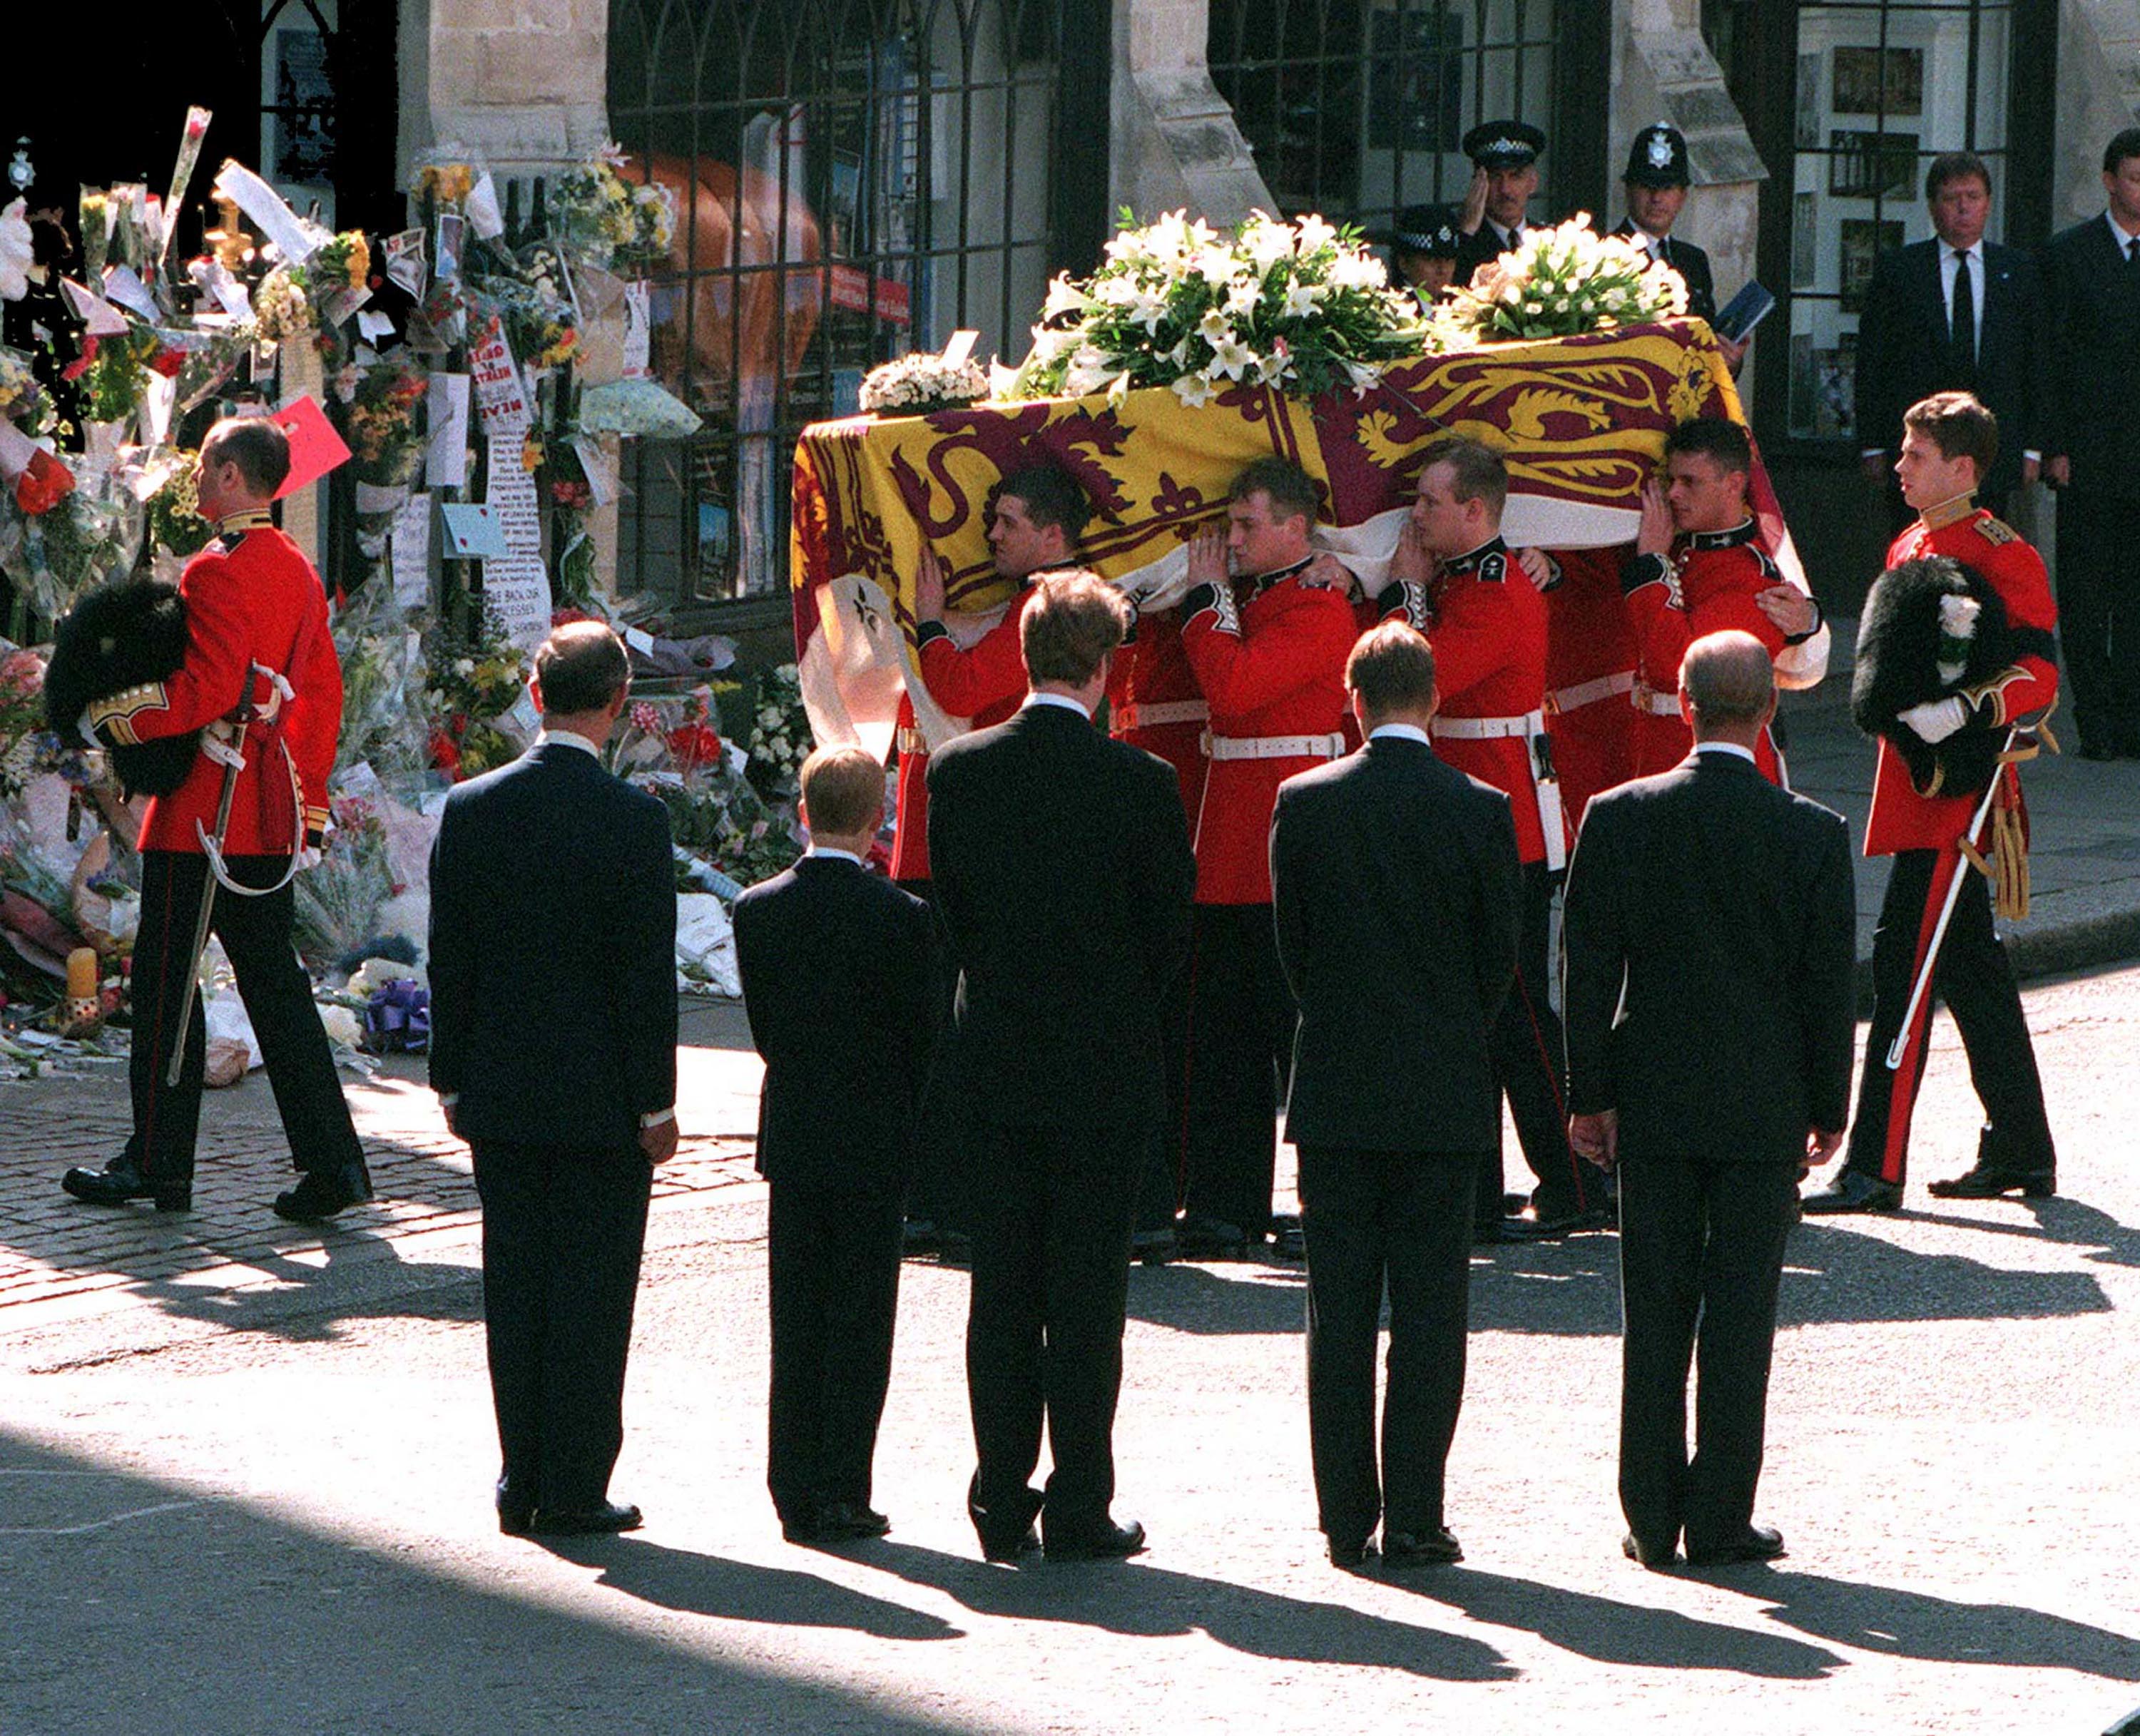 Prince Charles, Prince of Wales, Prince Harry, Earl Spencer, Prince William and Prince Philip, Duke of Edinburgh during Diana, Princess of Wales' funeral on September 06, 1997 at Westminster Abbey, London | Source: Getty Images